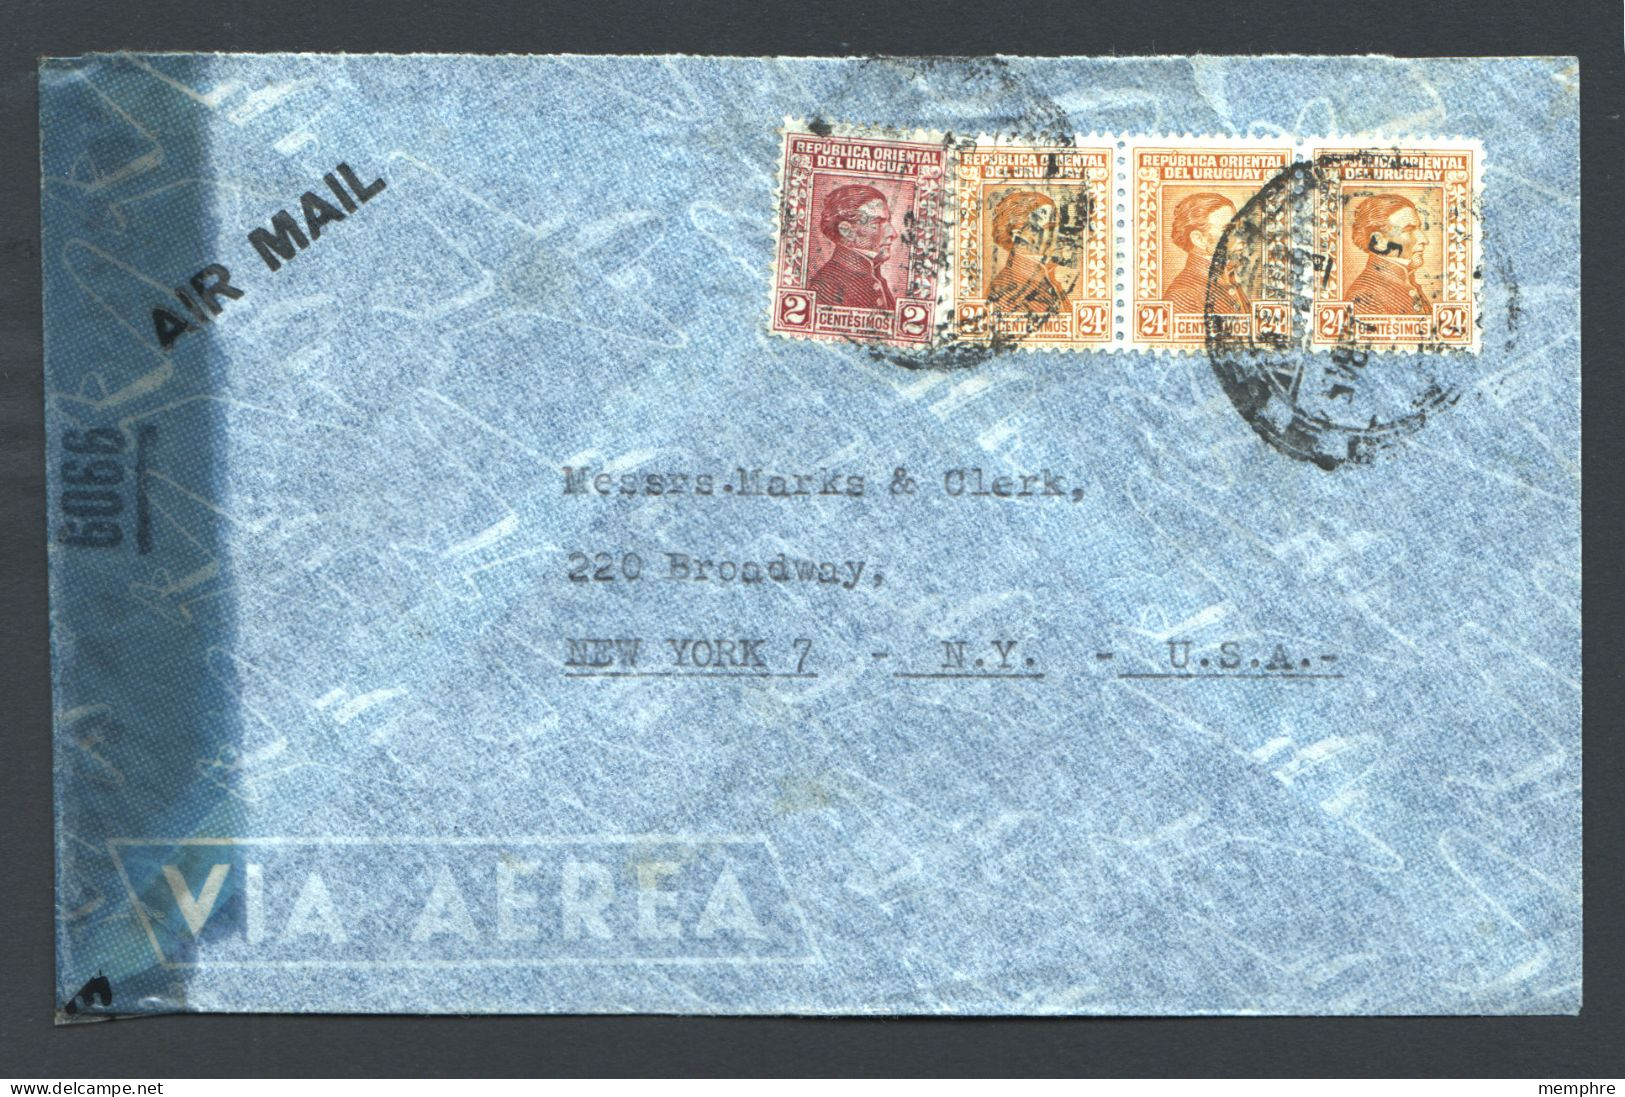 1945  Air  Letter To USA  - USA Censor Tape - Uruguay